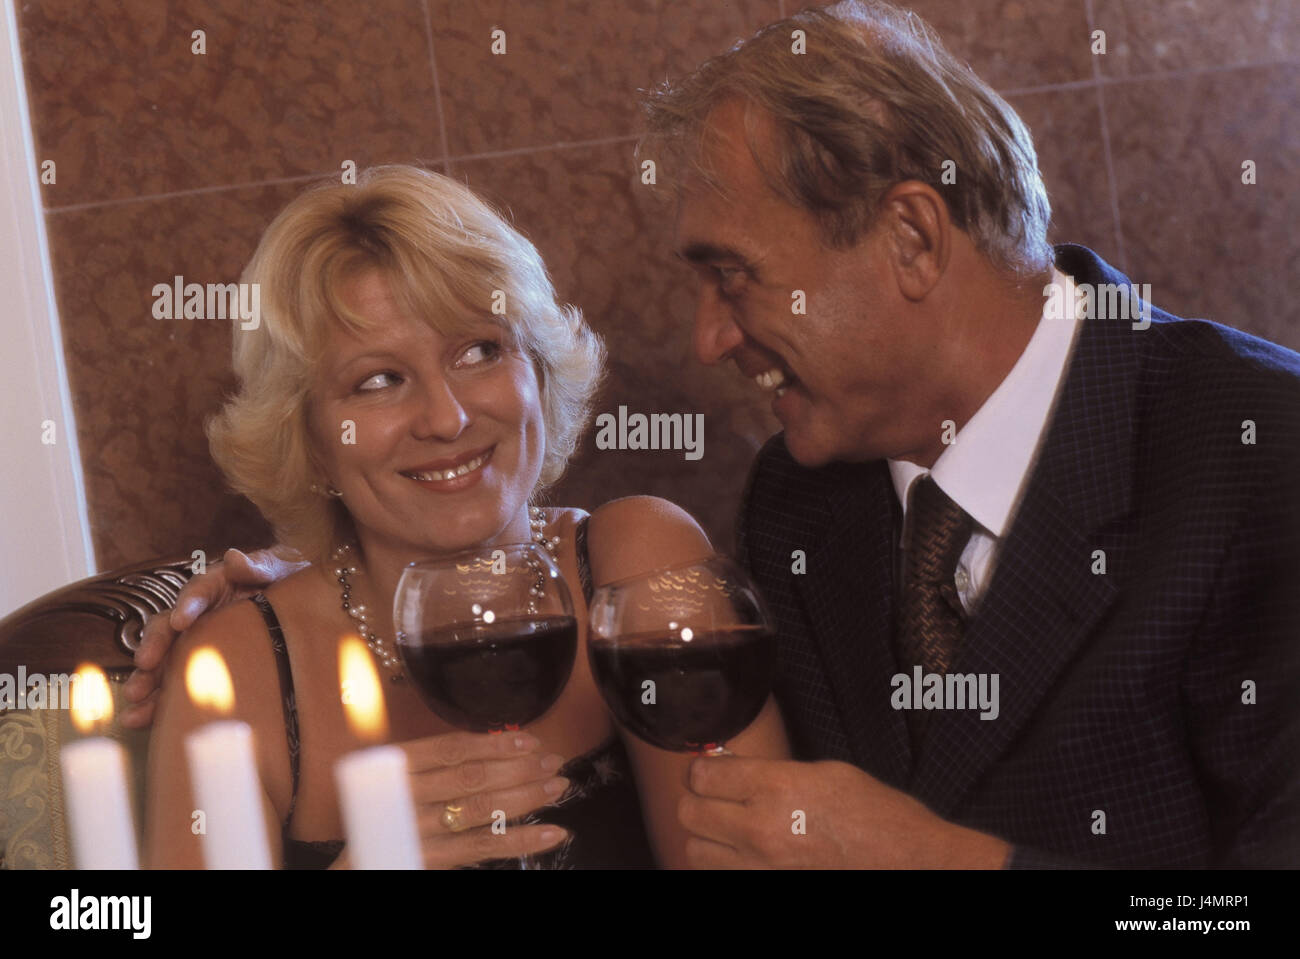 Couple, middle old person, wineglasses, kick off, happily partnership, 45 - 55 years, dates, respect, falls in love, love, affection, allowance, wine, red wine, drink, raise the glass, laugh, eye contact, flirtation, flirt, happily, joy, contently, lifestyle, tuning, inside, 40-50 years, 50-60 years Stock Photo